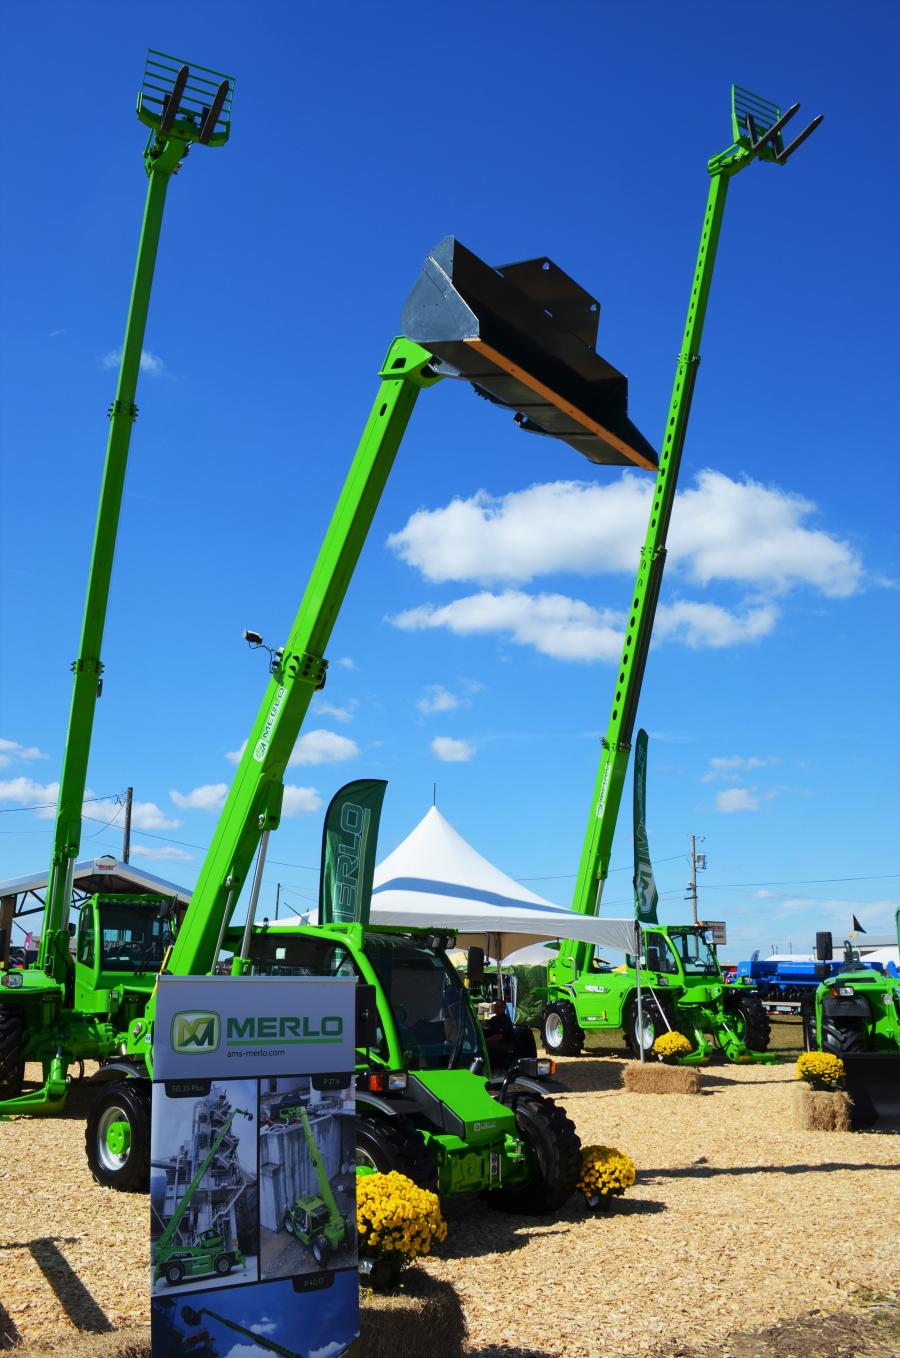 With its distinctive green machines and its material handlers boomed up, the Merlo exhibit area wasn’t that hard to track down from anywhere on the 100 acre Expo footprint.